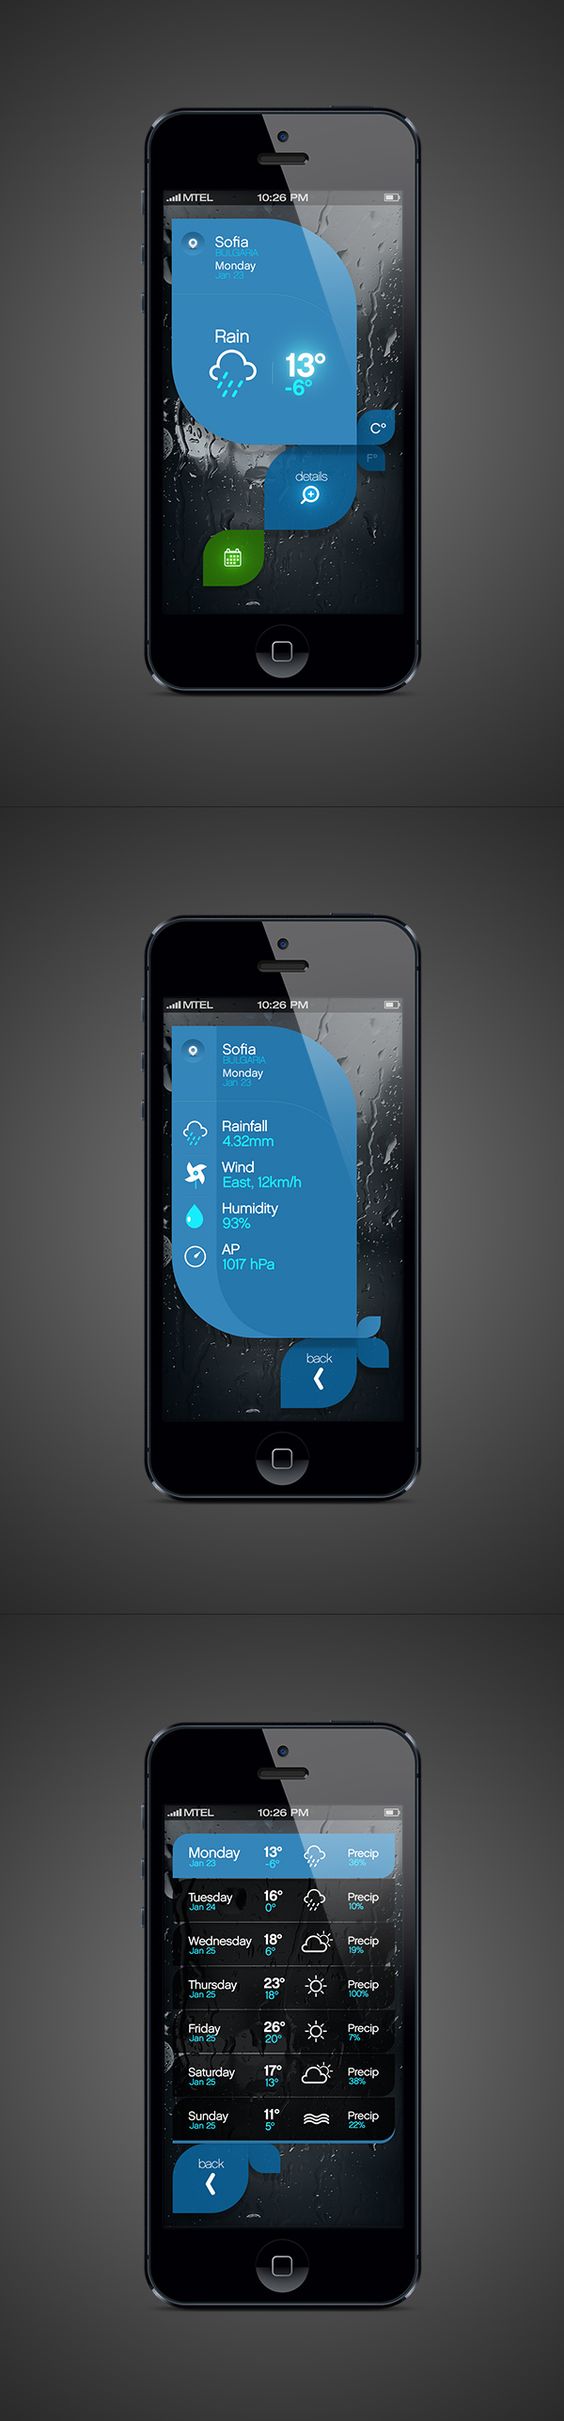 Weather App | Designer: Tsvetelin Nikolov - I know who needs another weather app. But this one is actually interesting